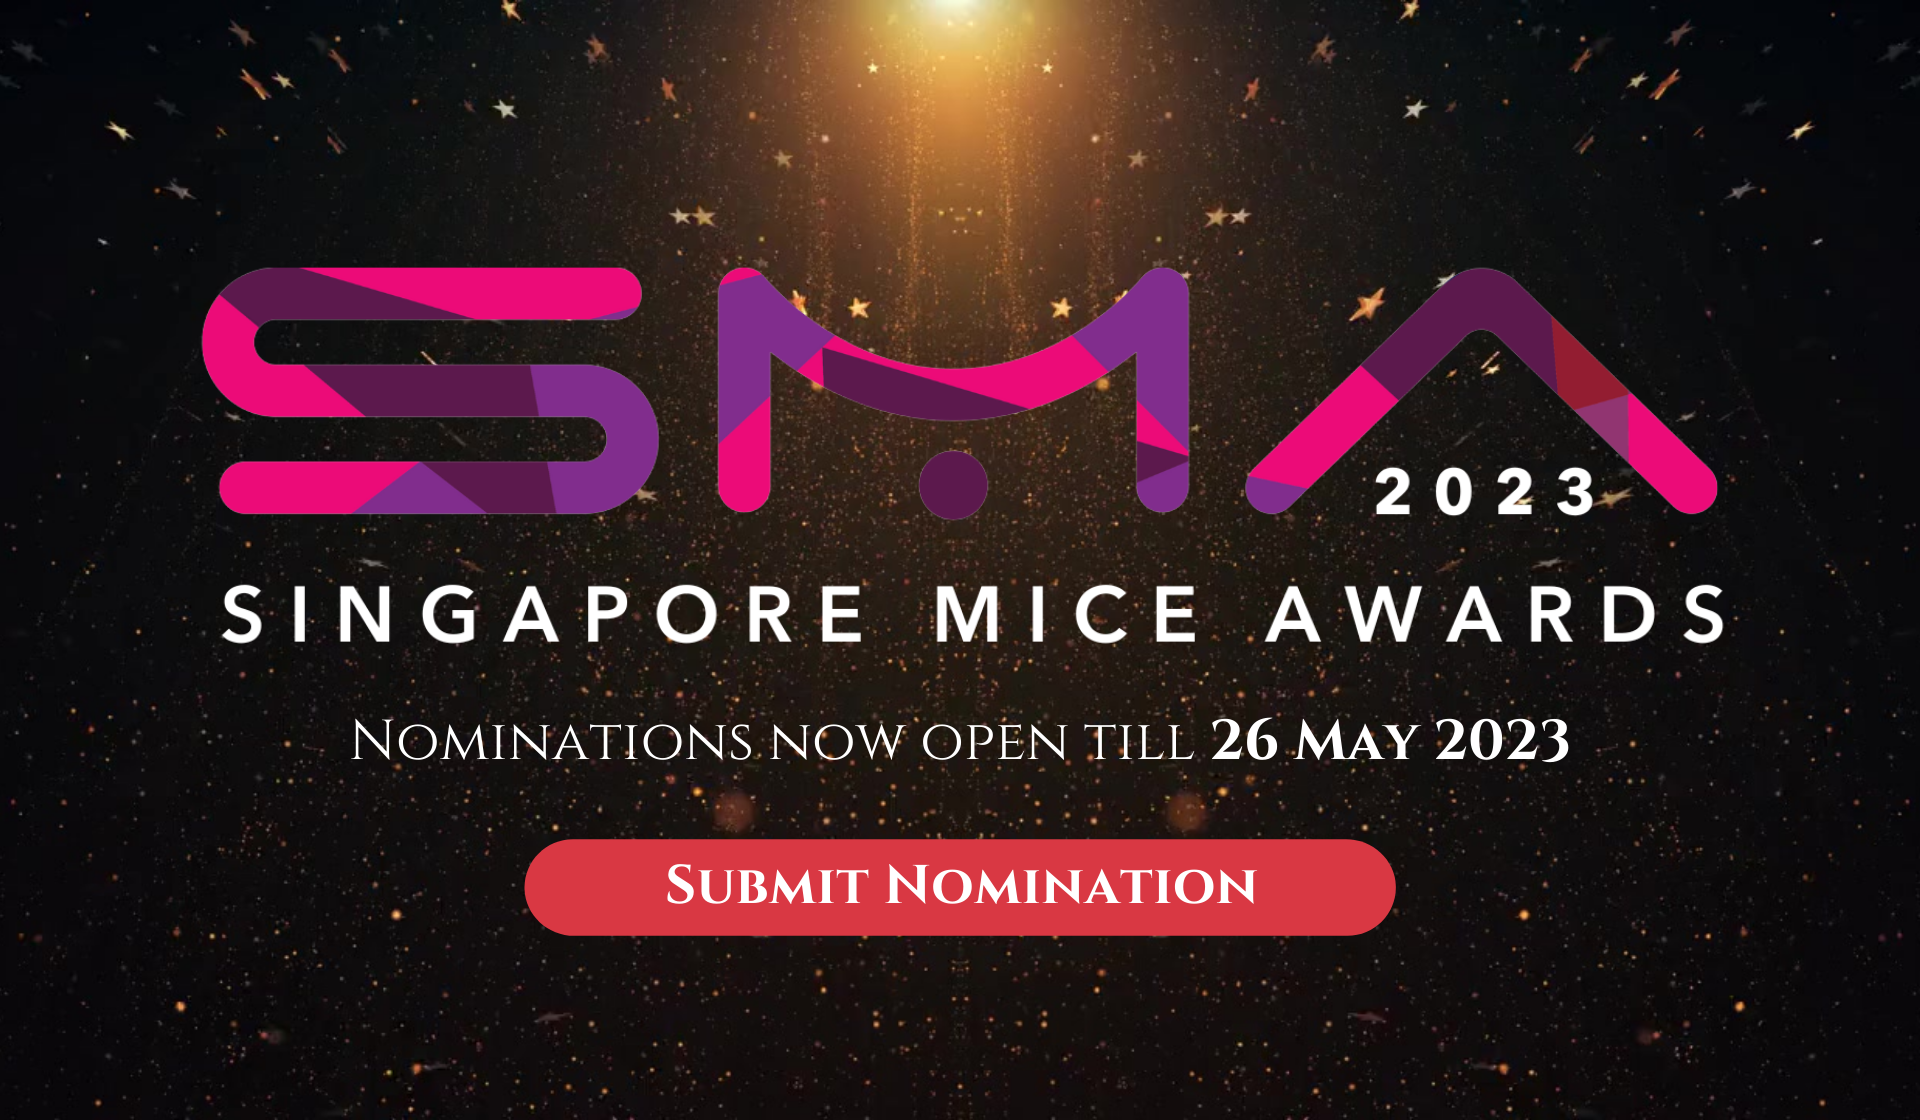 The best of MICE industry to be honoured at inaugural Singapore MICE Awards